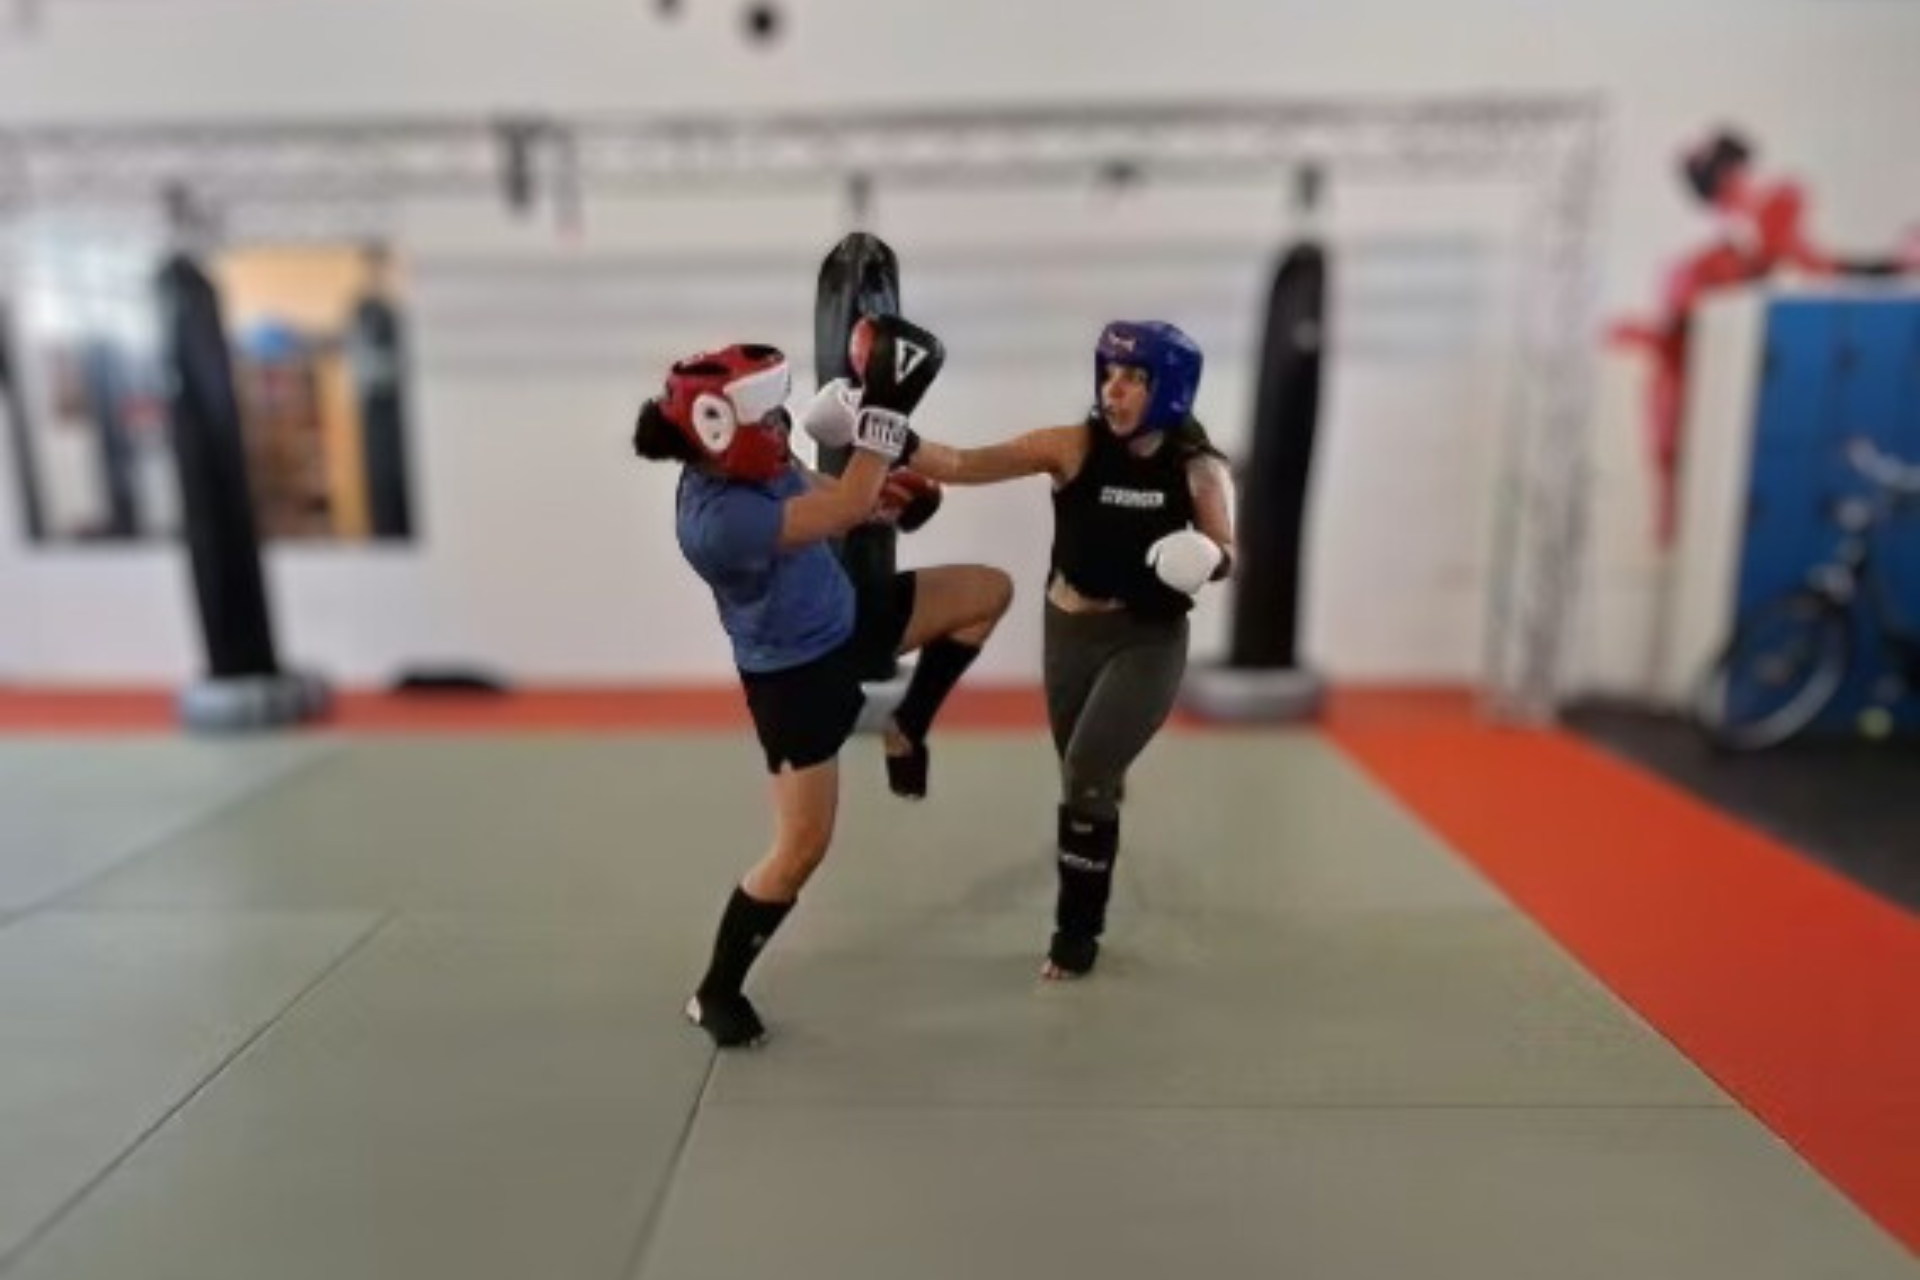 Two ladies sparring ART Boxing wearing full protection gear. Head gear, shin guards and boxing gloves.